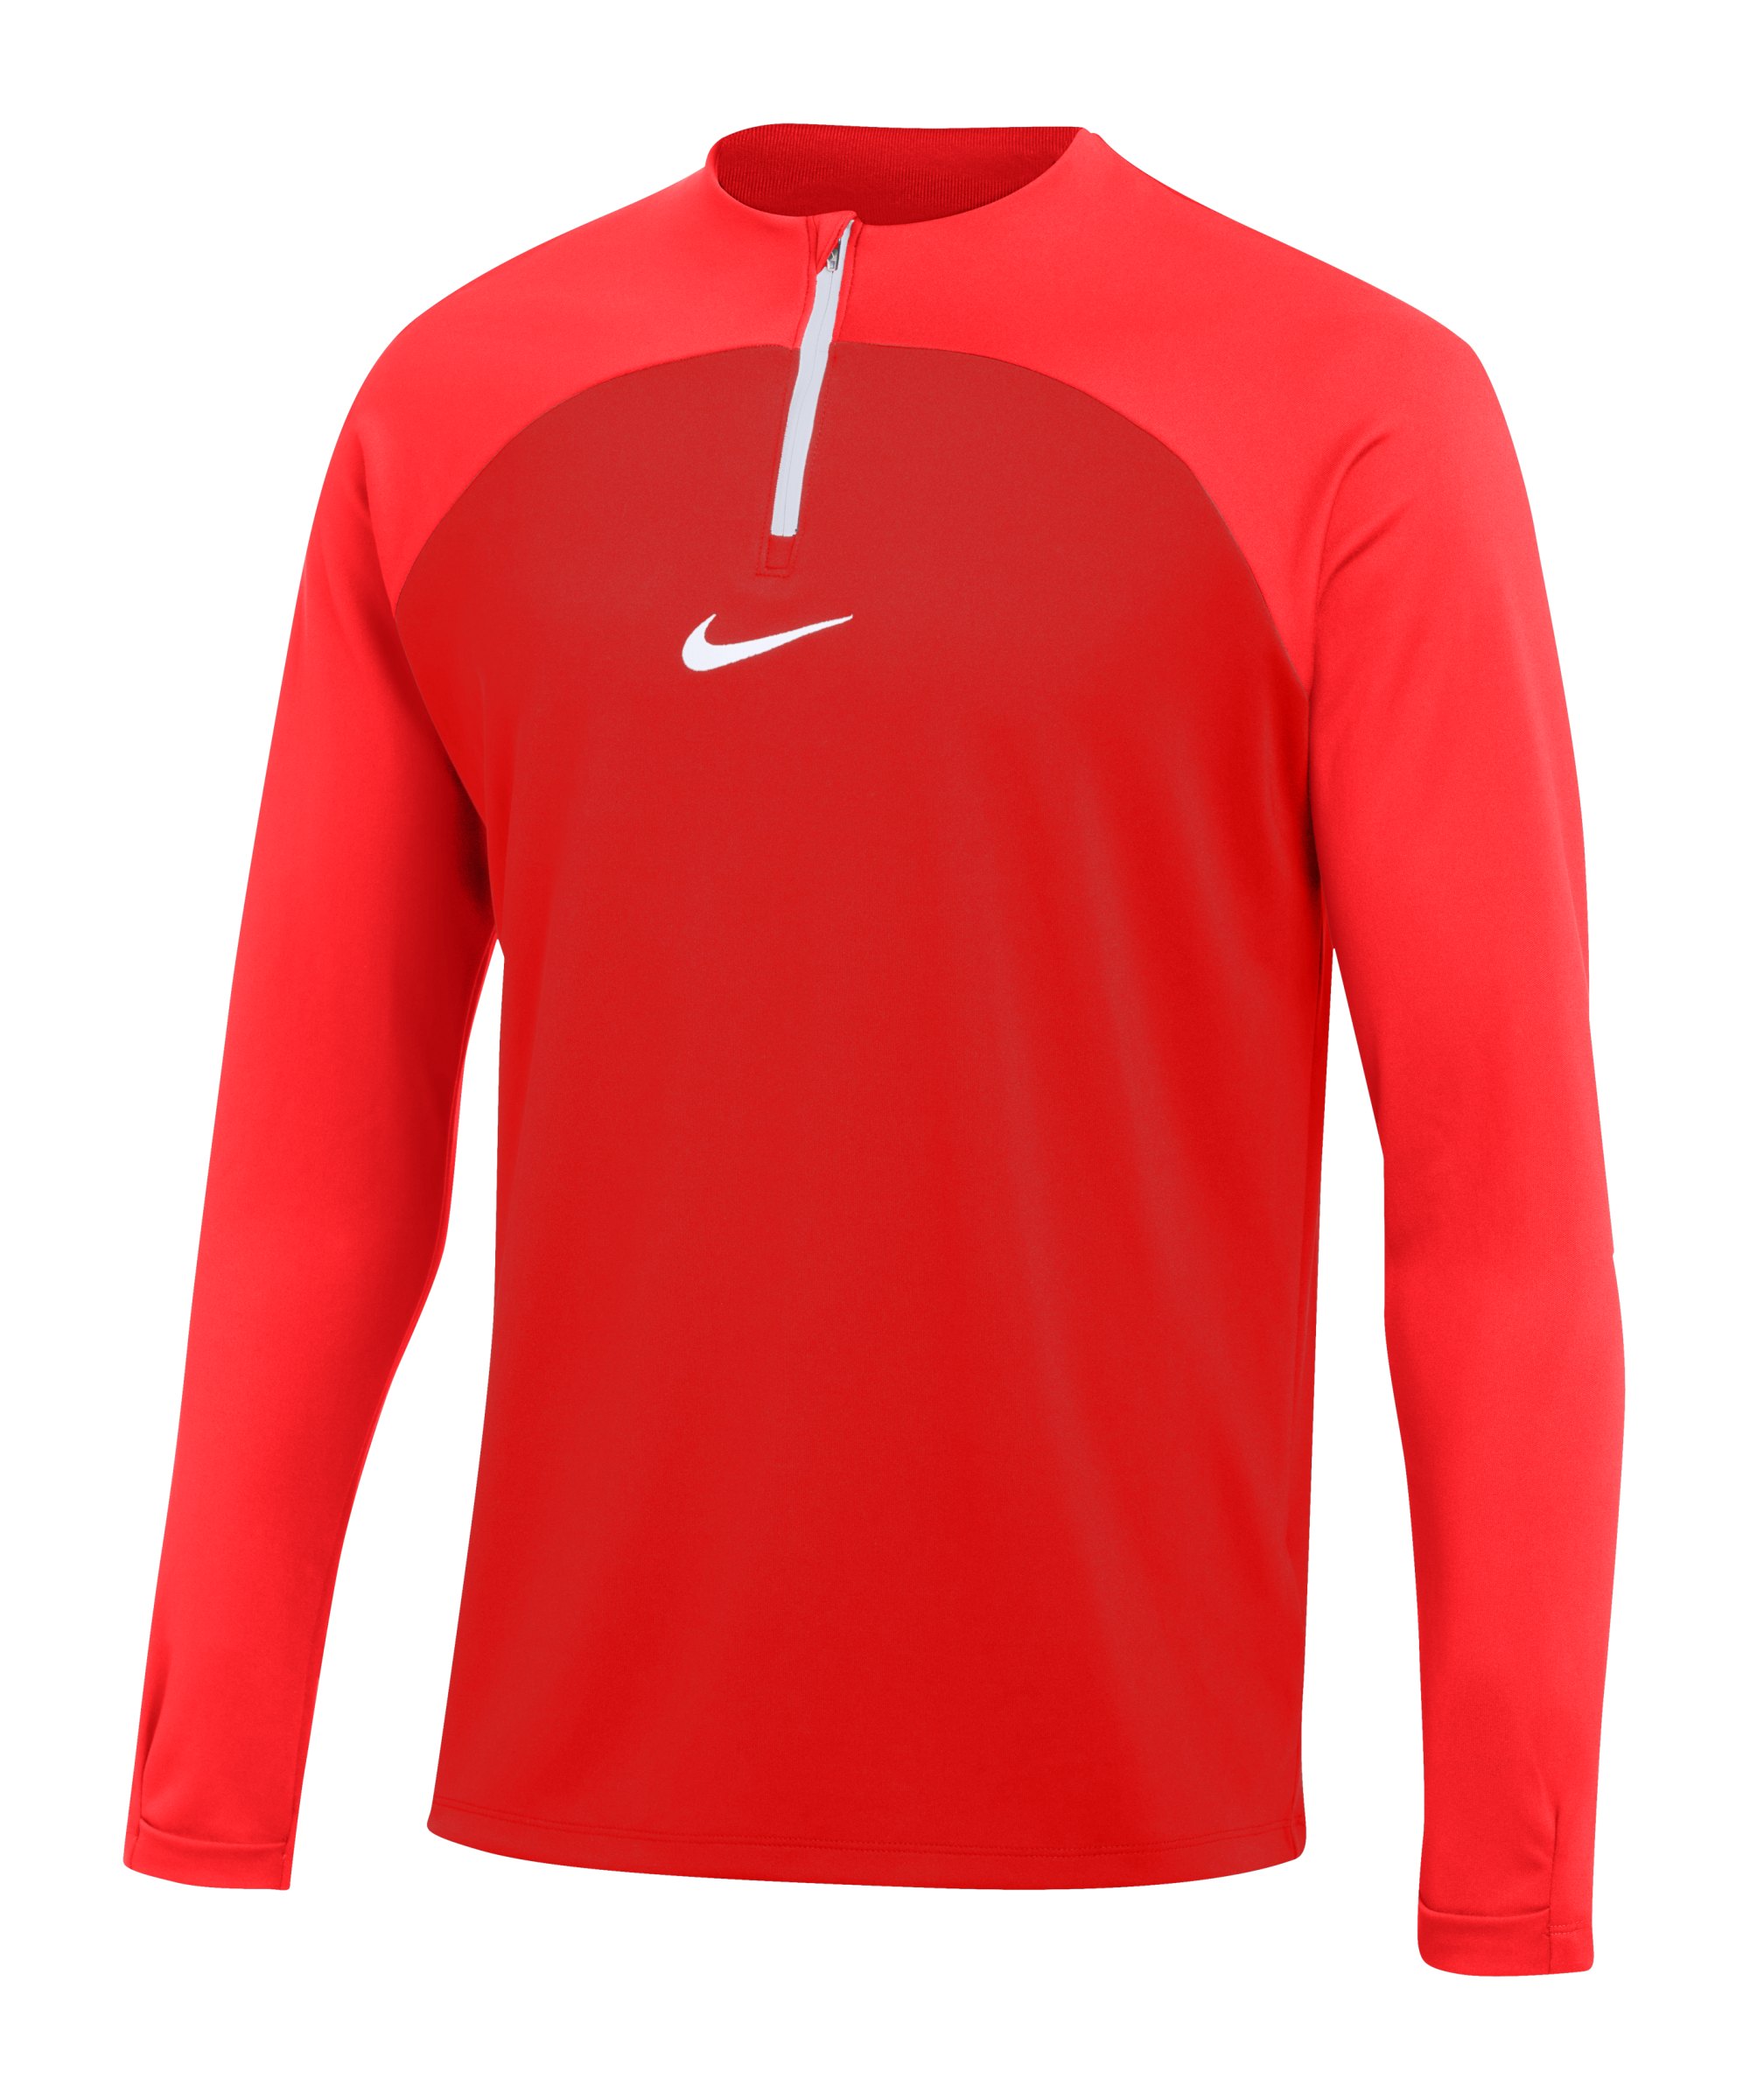 Nike Academy Pro Drill Top Rot Weiss F657 - rot